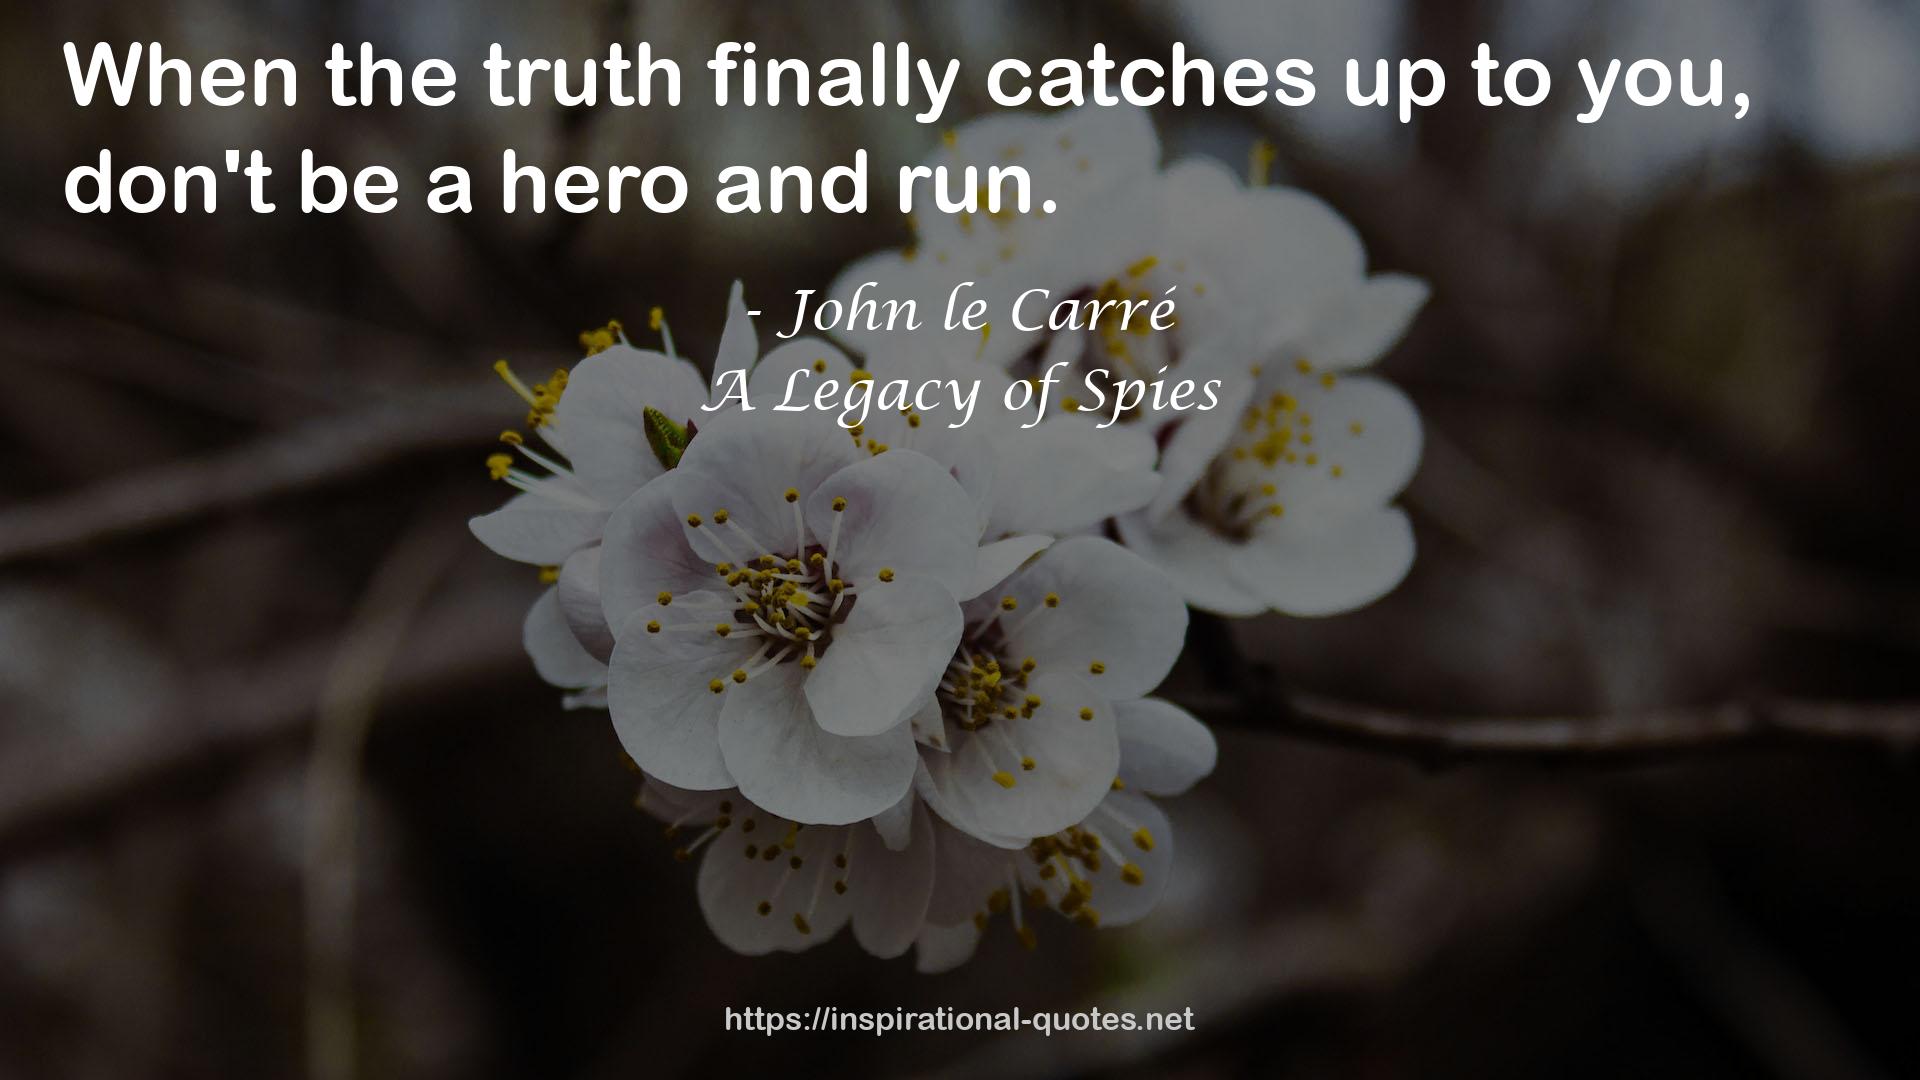 A Legacy of Spies QUOTES